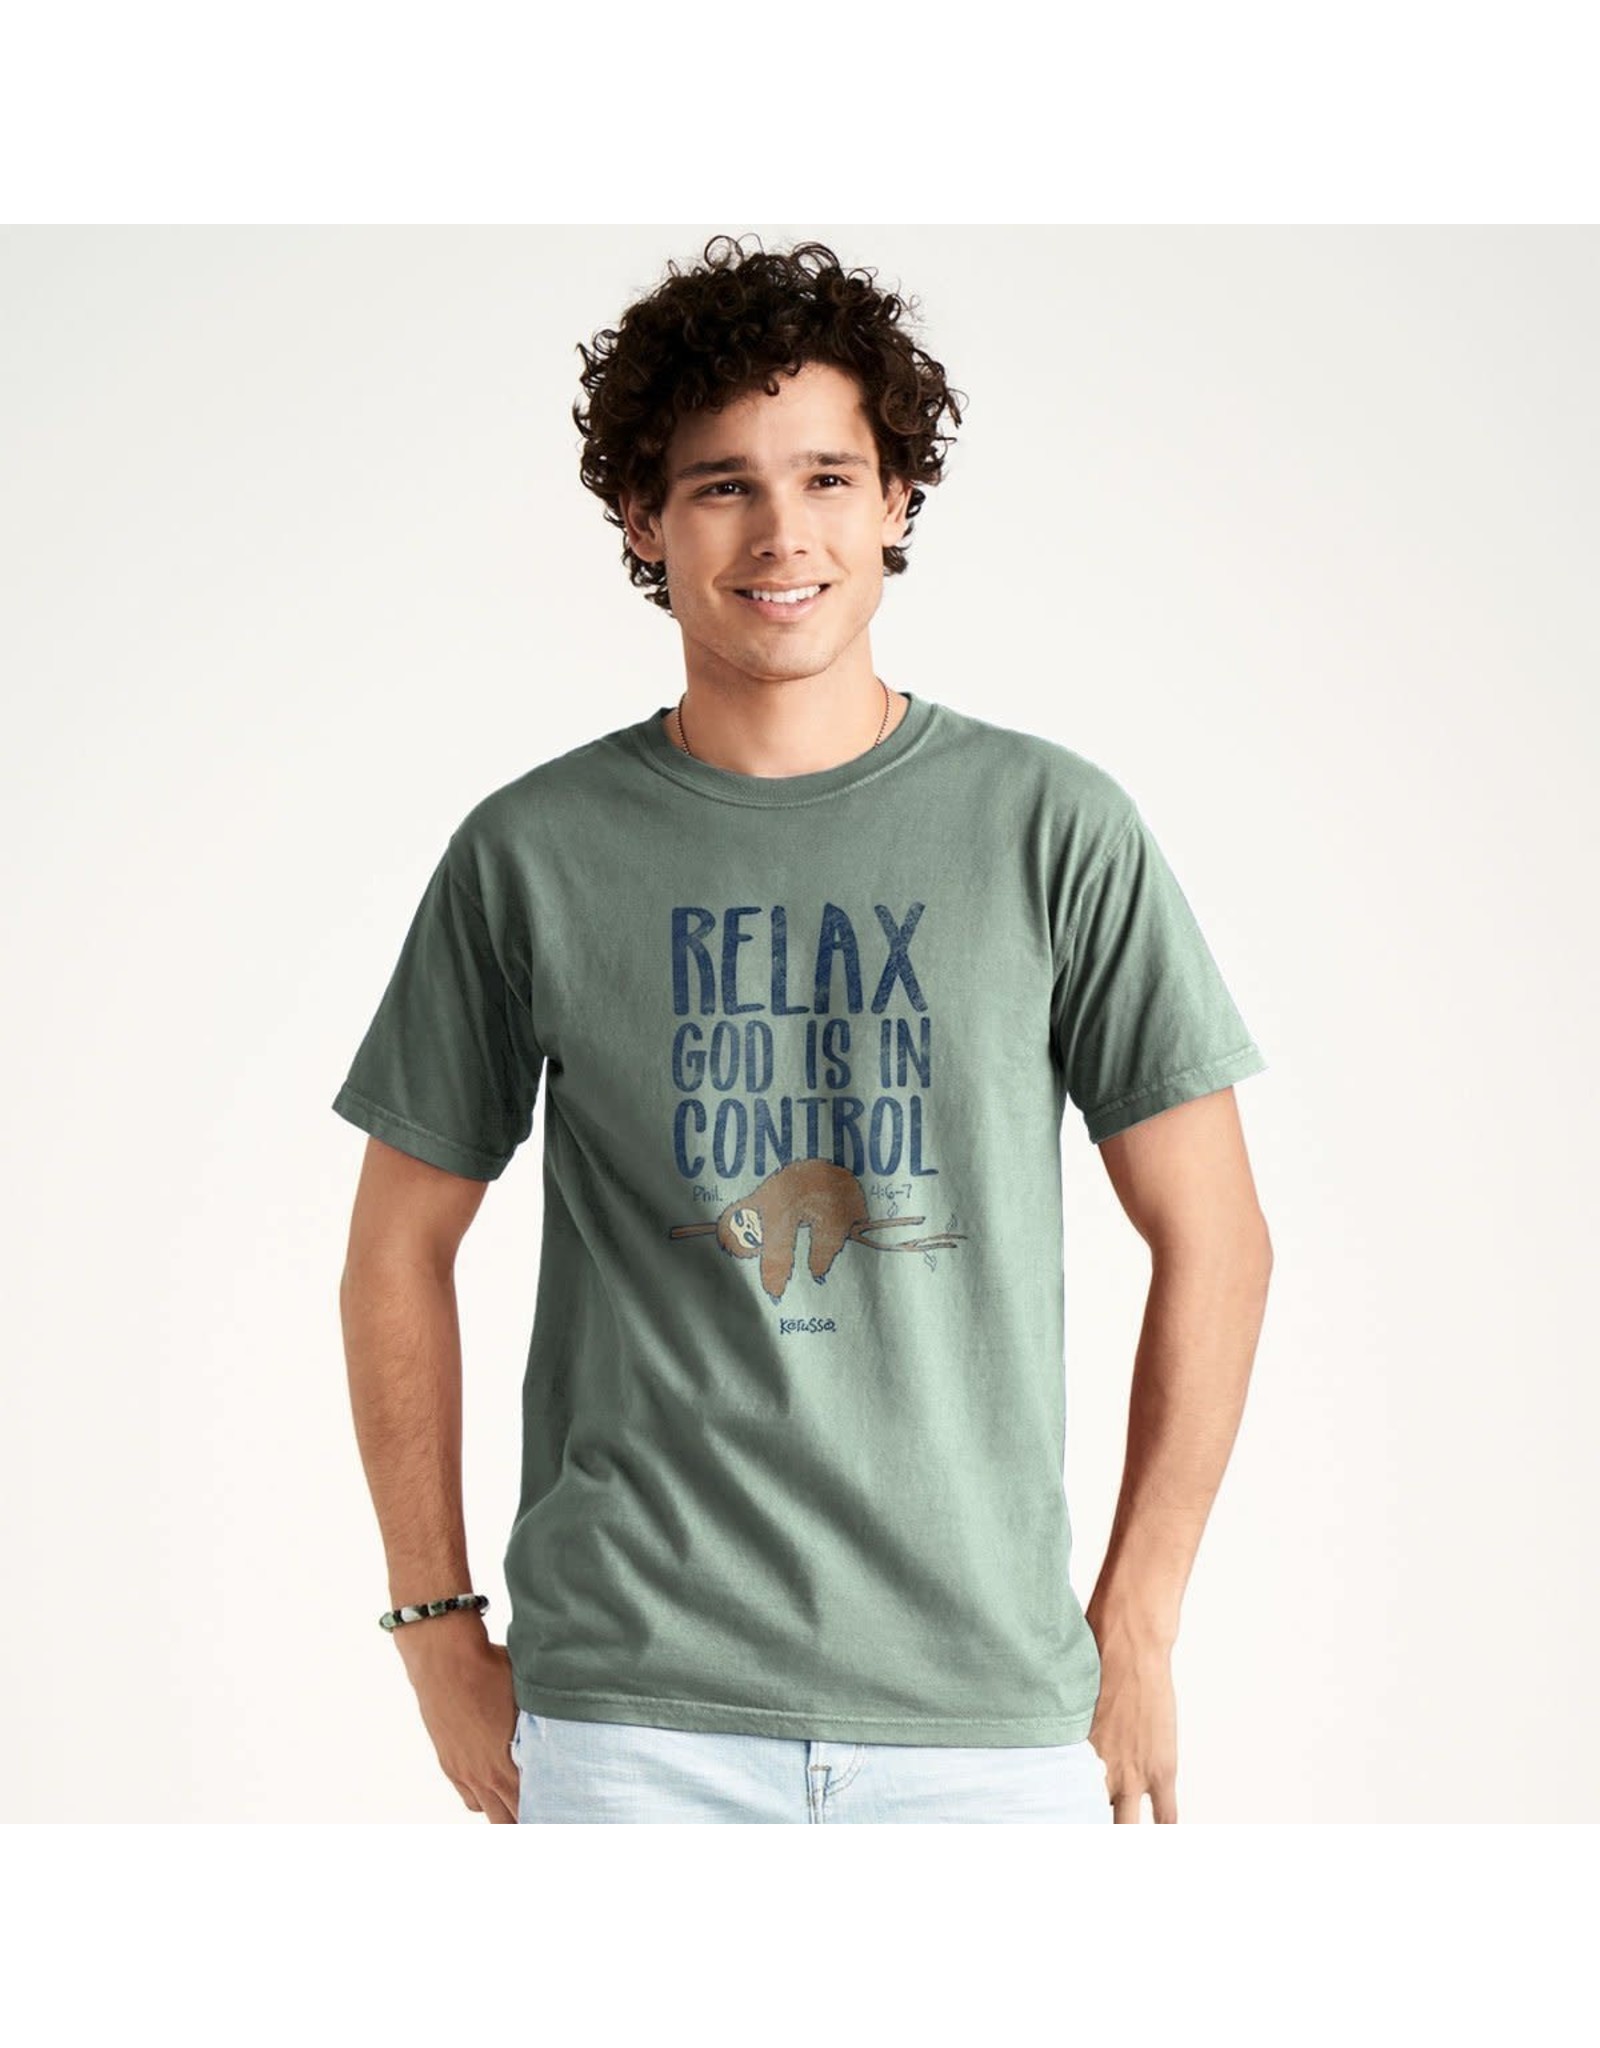 Kerusso Adult Shirt - Relax Sloth